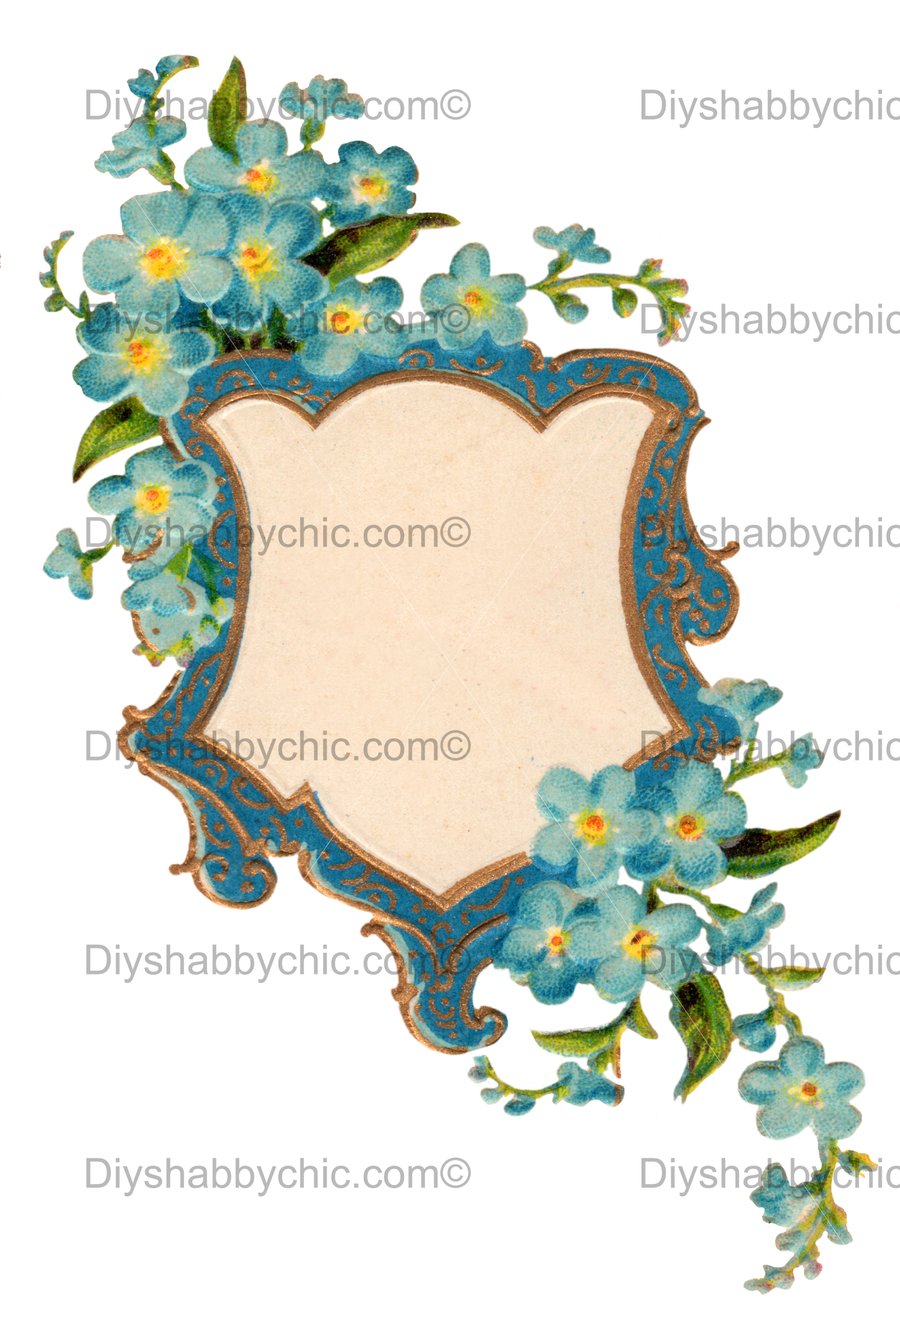 Waterslide Wood Furniture Decal Vintage Image Transfer Shabby Chic Blue Label